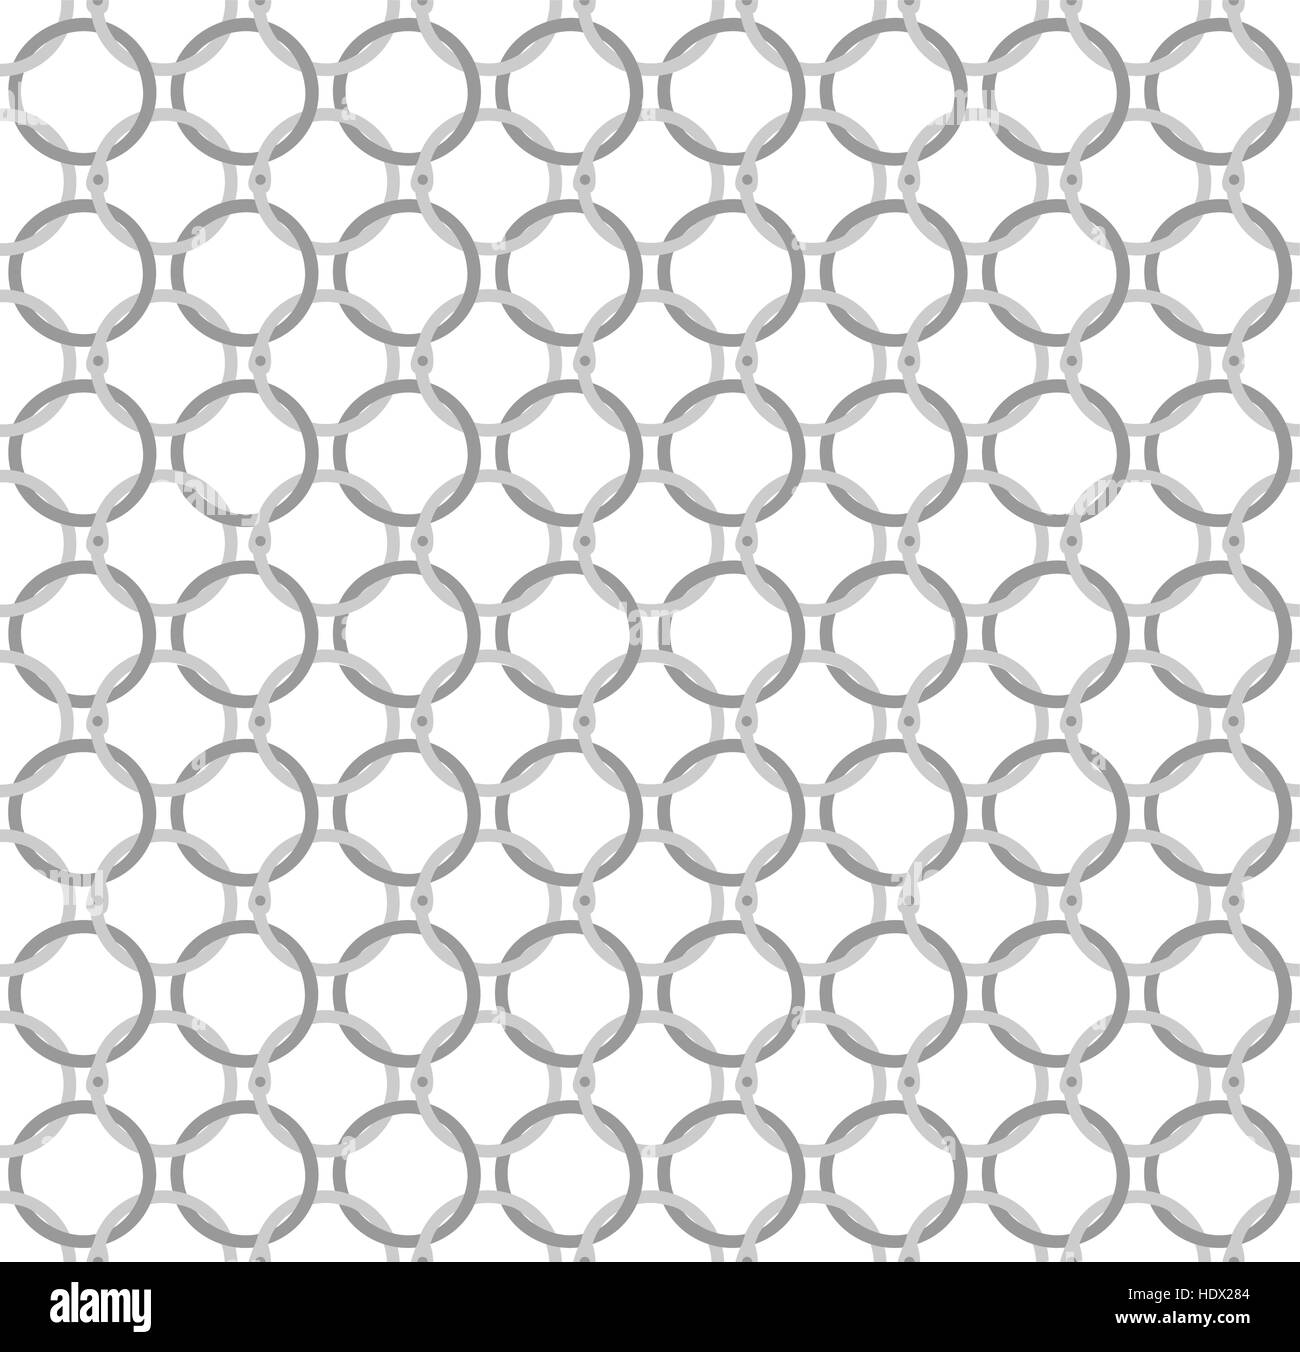 Seamless vector pattern twisted steel rings like chain mail Stock Vector